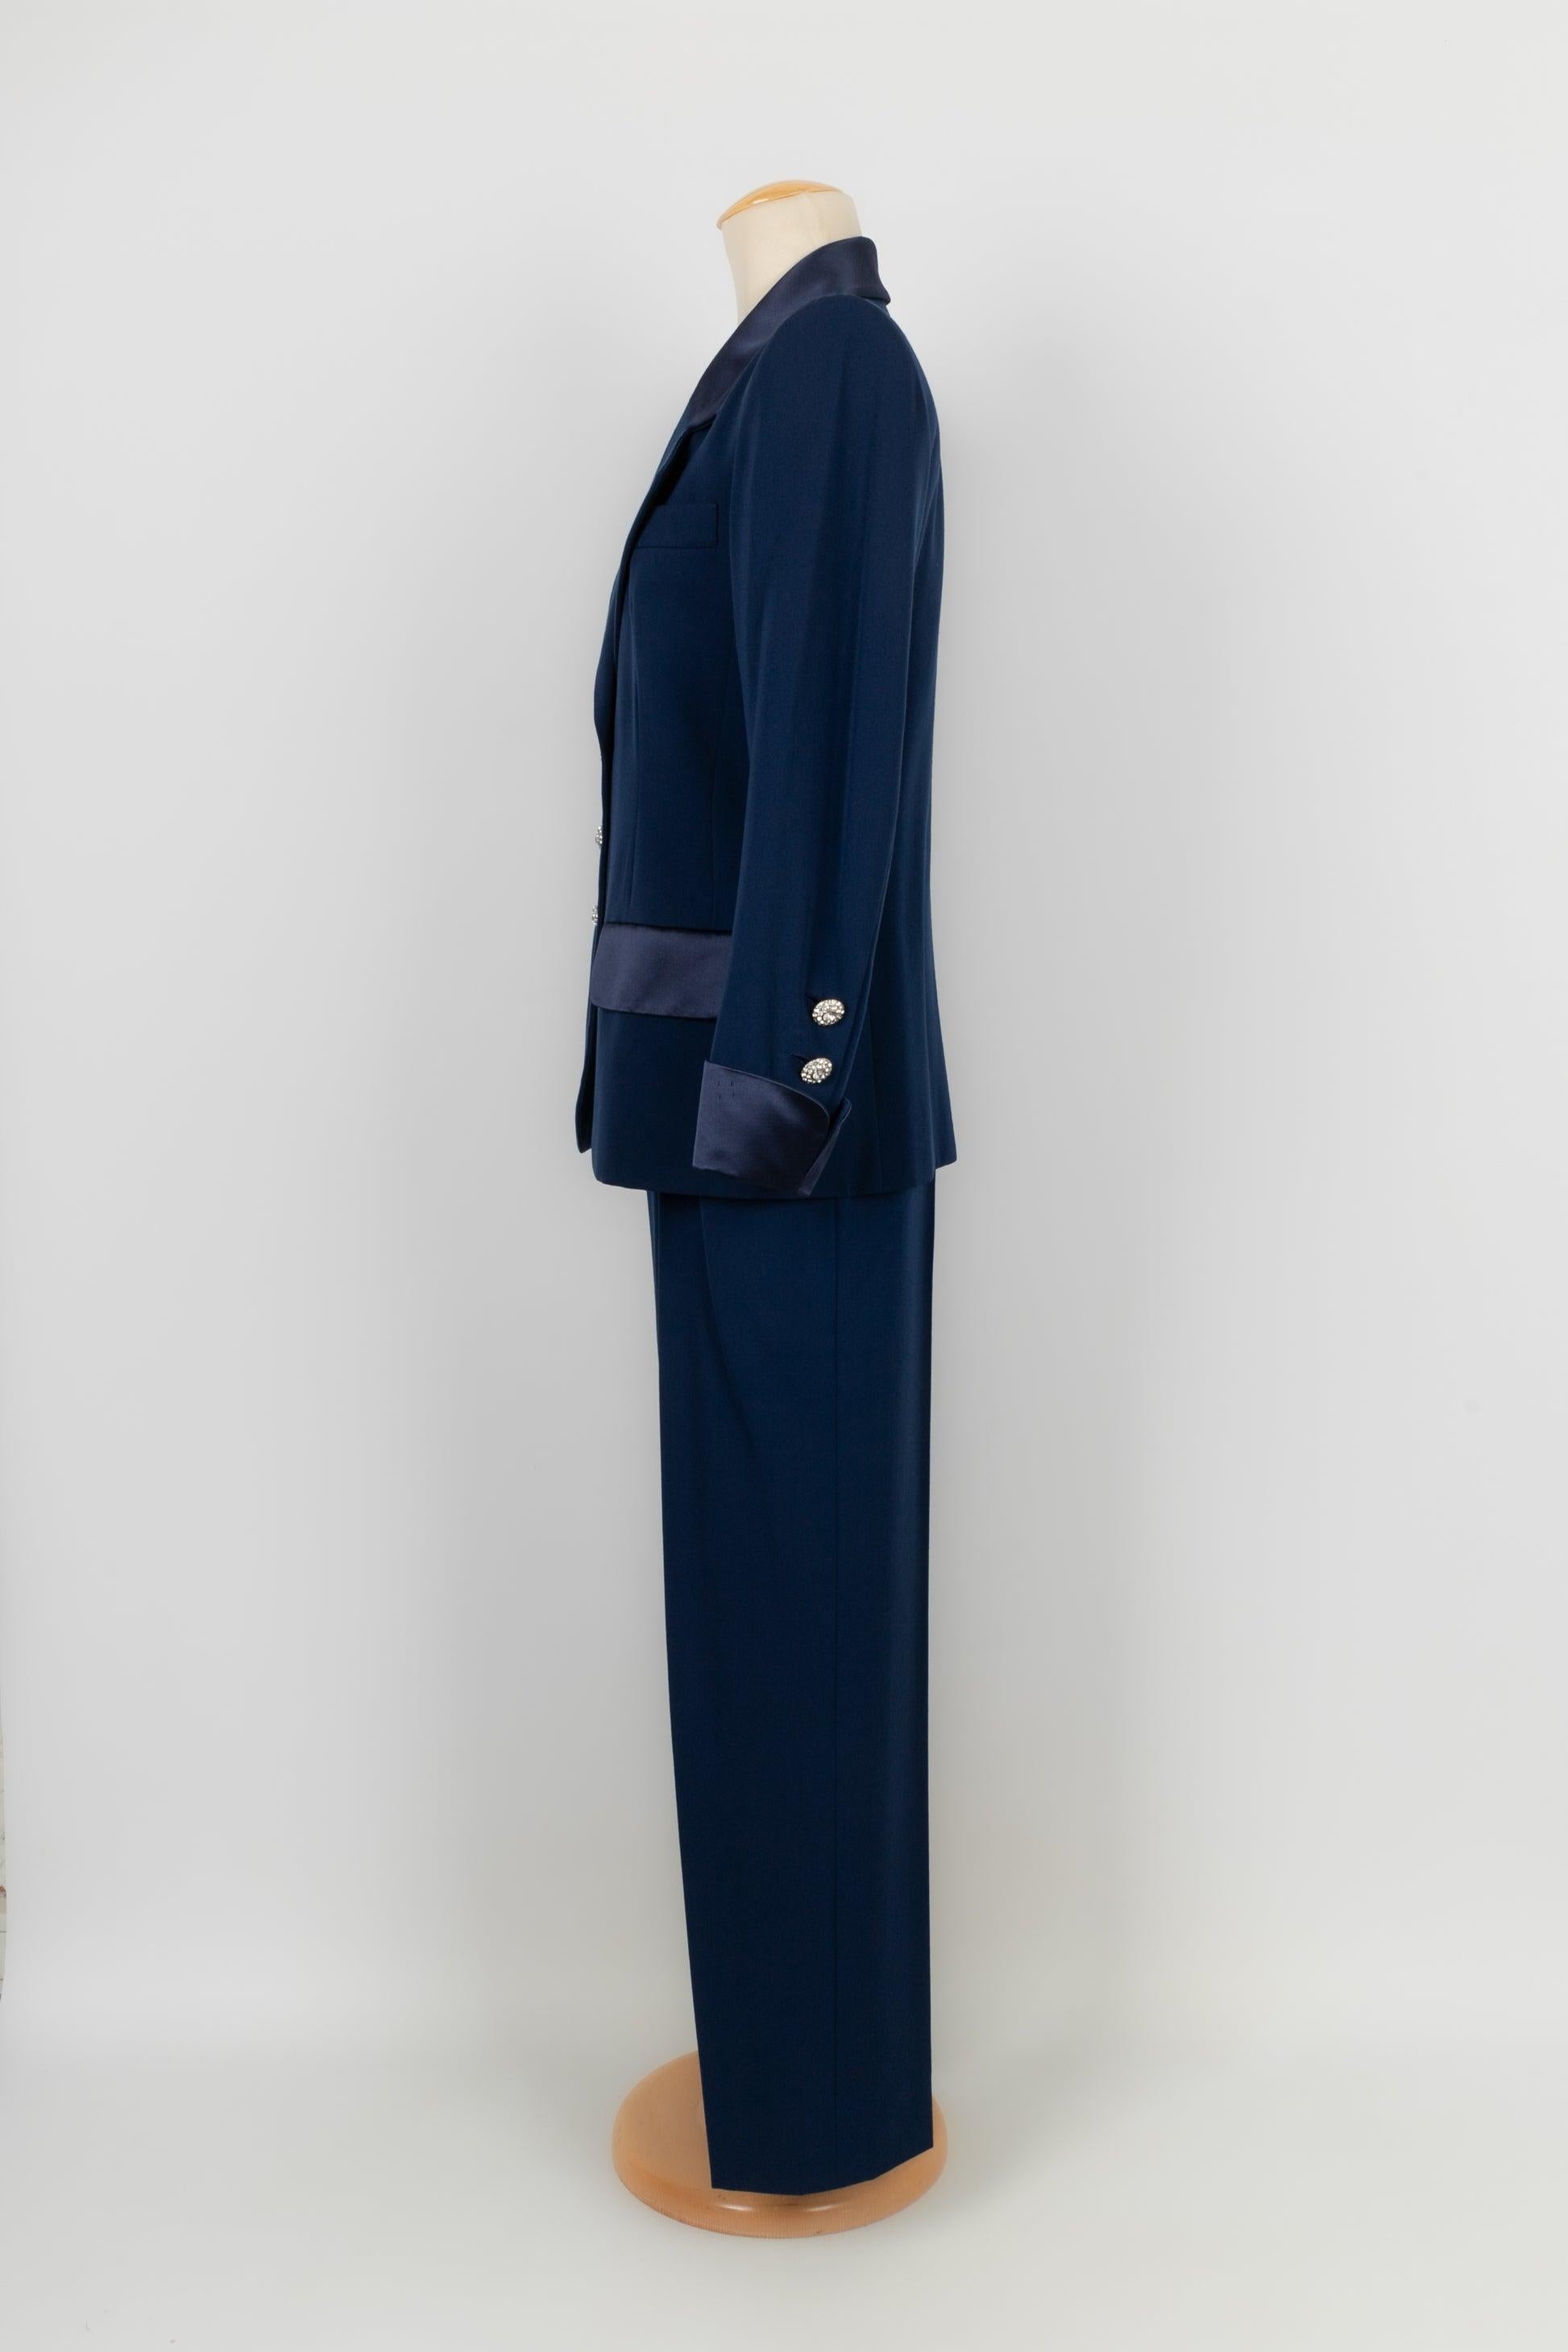 Yves Saint Laurent - (Made in France) Blue wool Haute Couture pantsuit with blue silk satin sleeve lapels. No size nor composition label, it fits a 36FR/38FR. To be noted, hitches around the sleeve.

Additional information:
Condition: Good